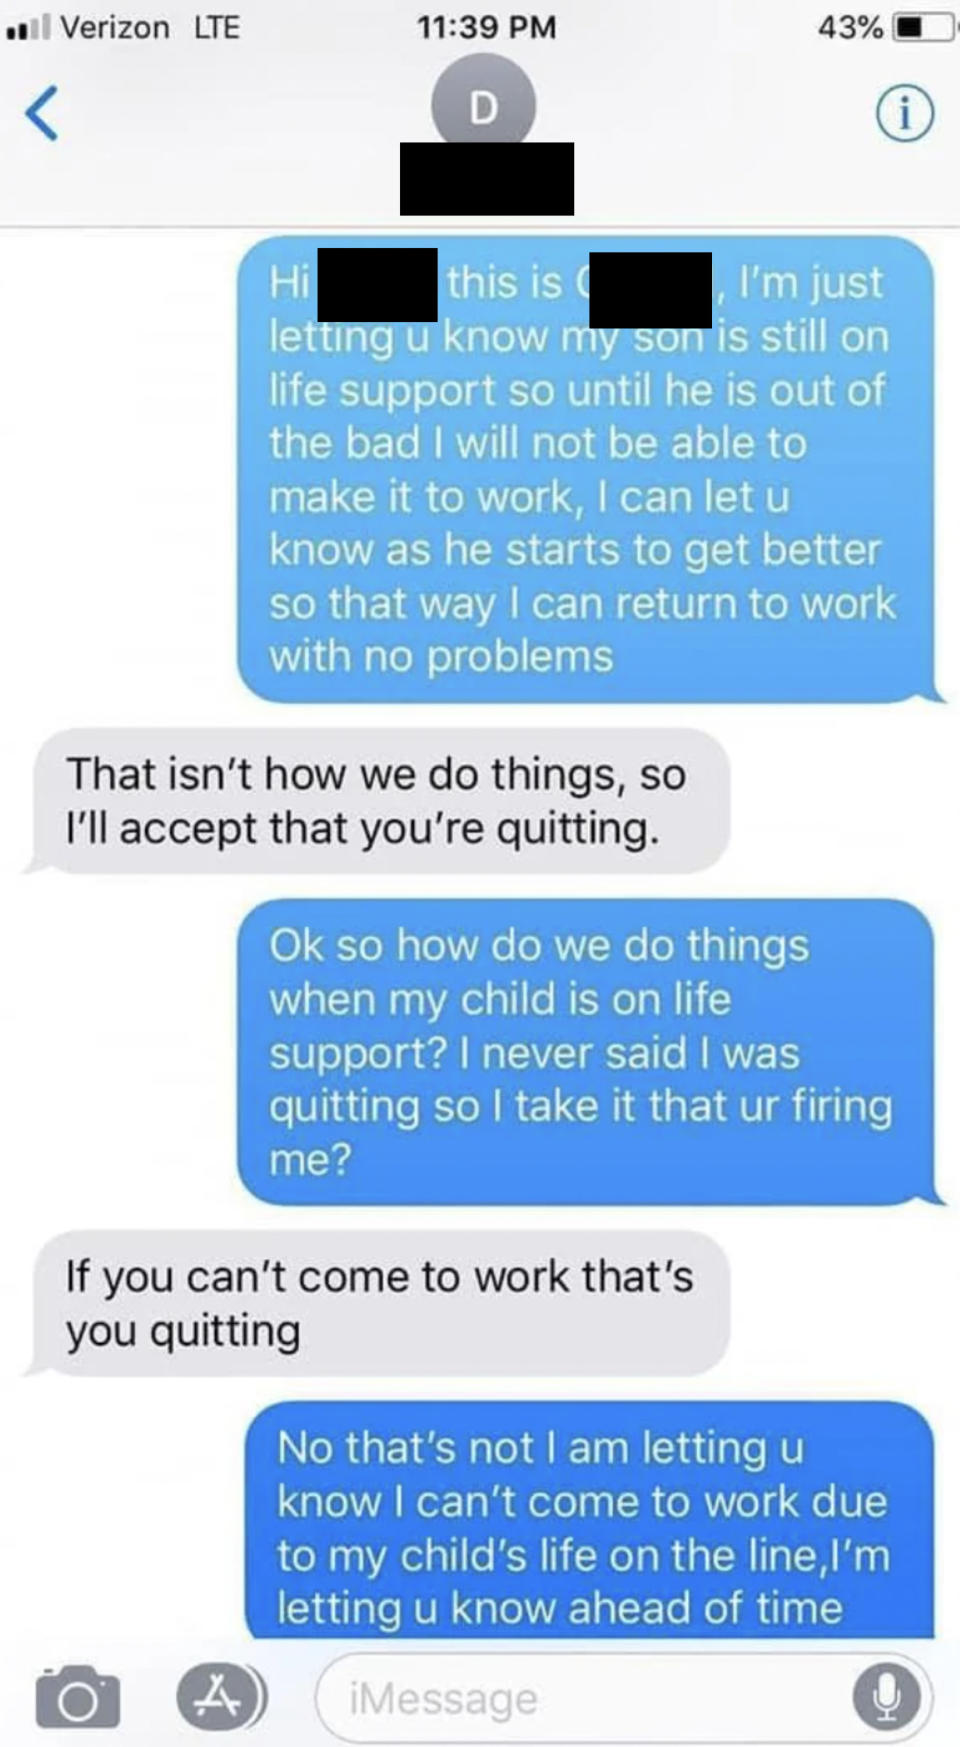 A text exchange where an employee tells their boss that their son is on life support so they can't work - the boss says they're fired if they don't come into work